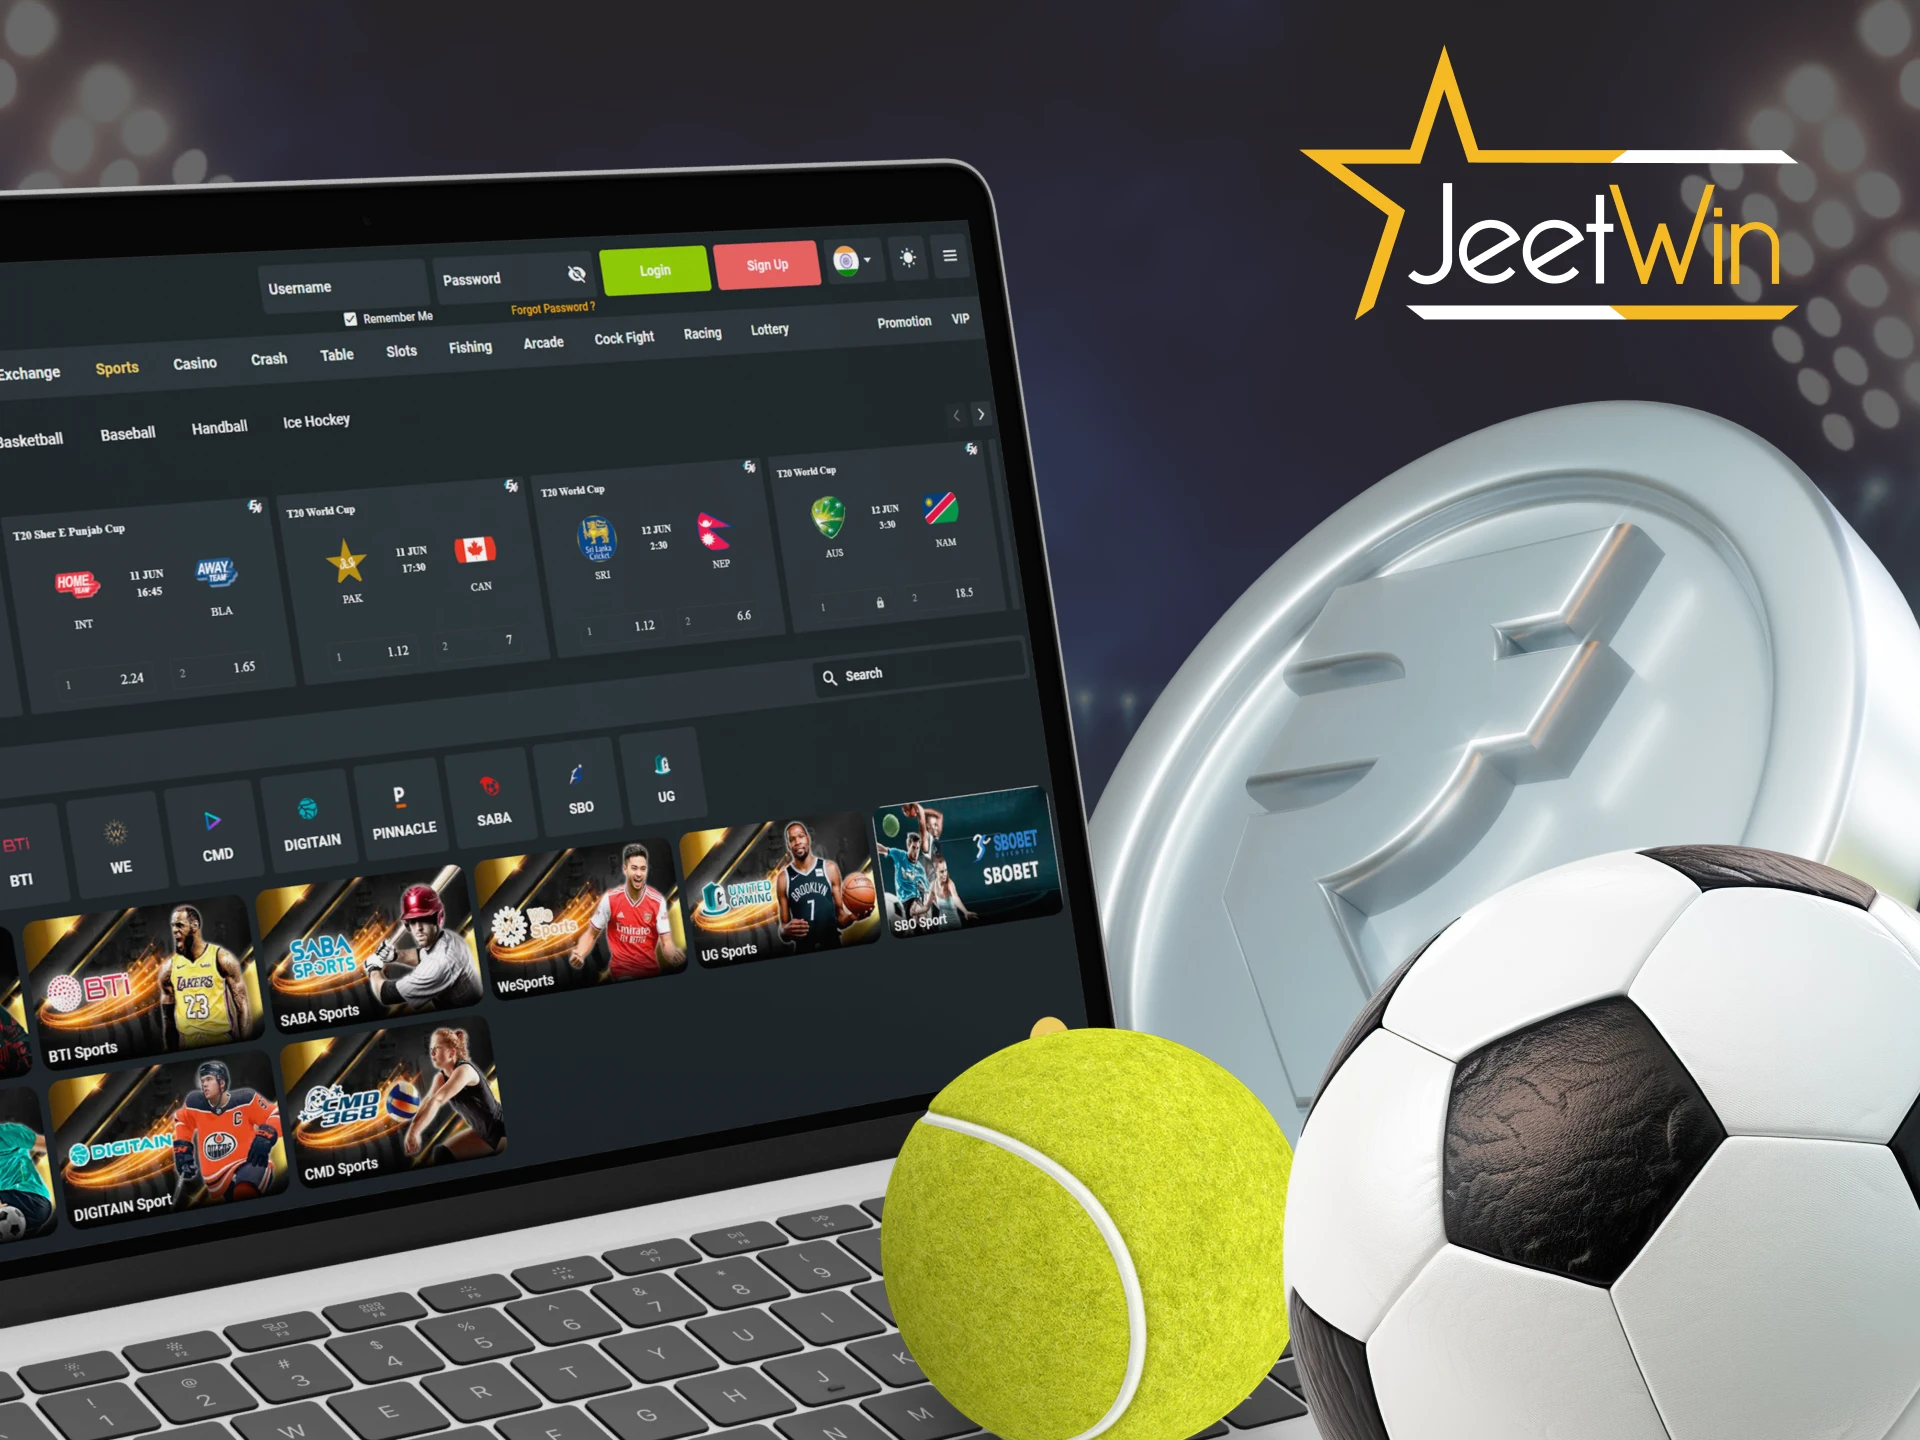 Jeetwin has a large sports betting section.